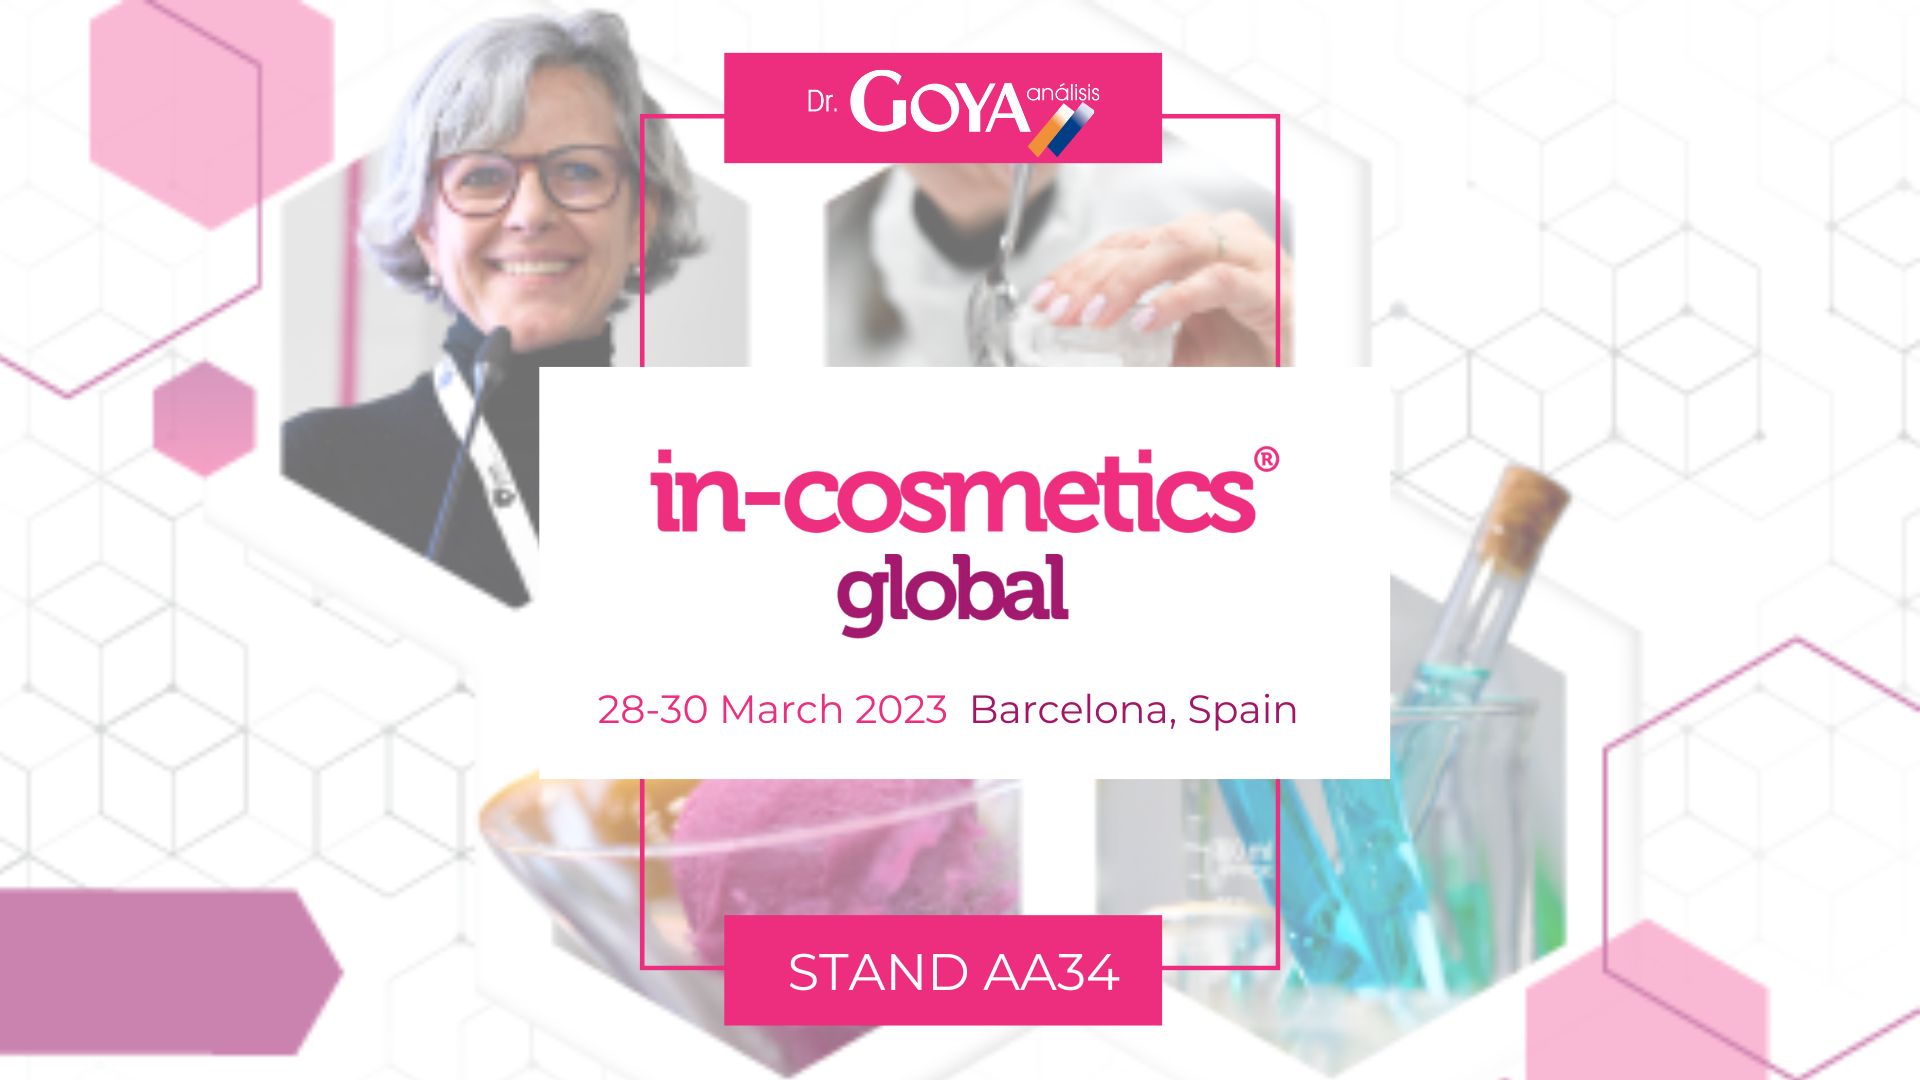 DR. GOYA ANALYSIS PRESENT AT IN-COSMETICS GLOBAL